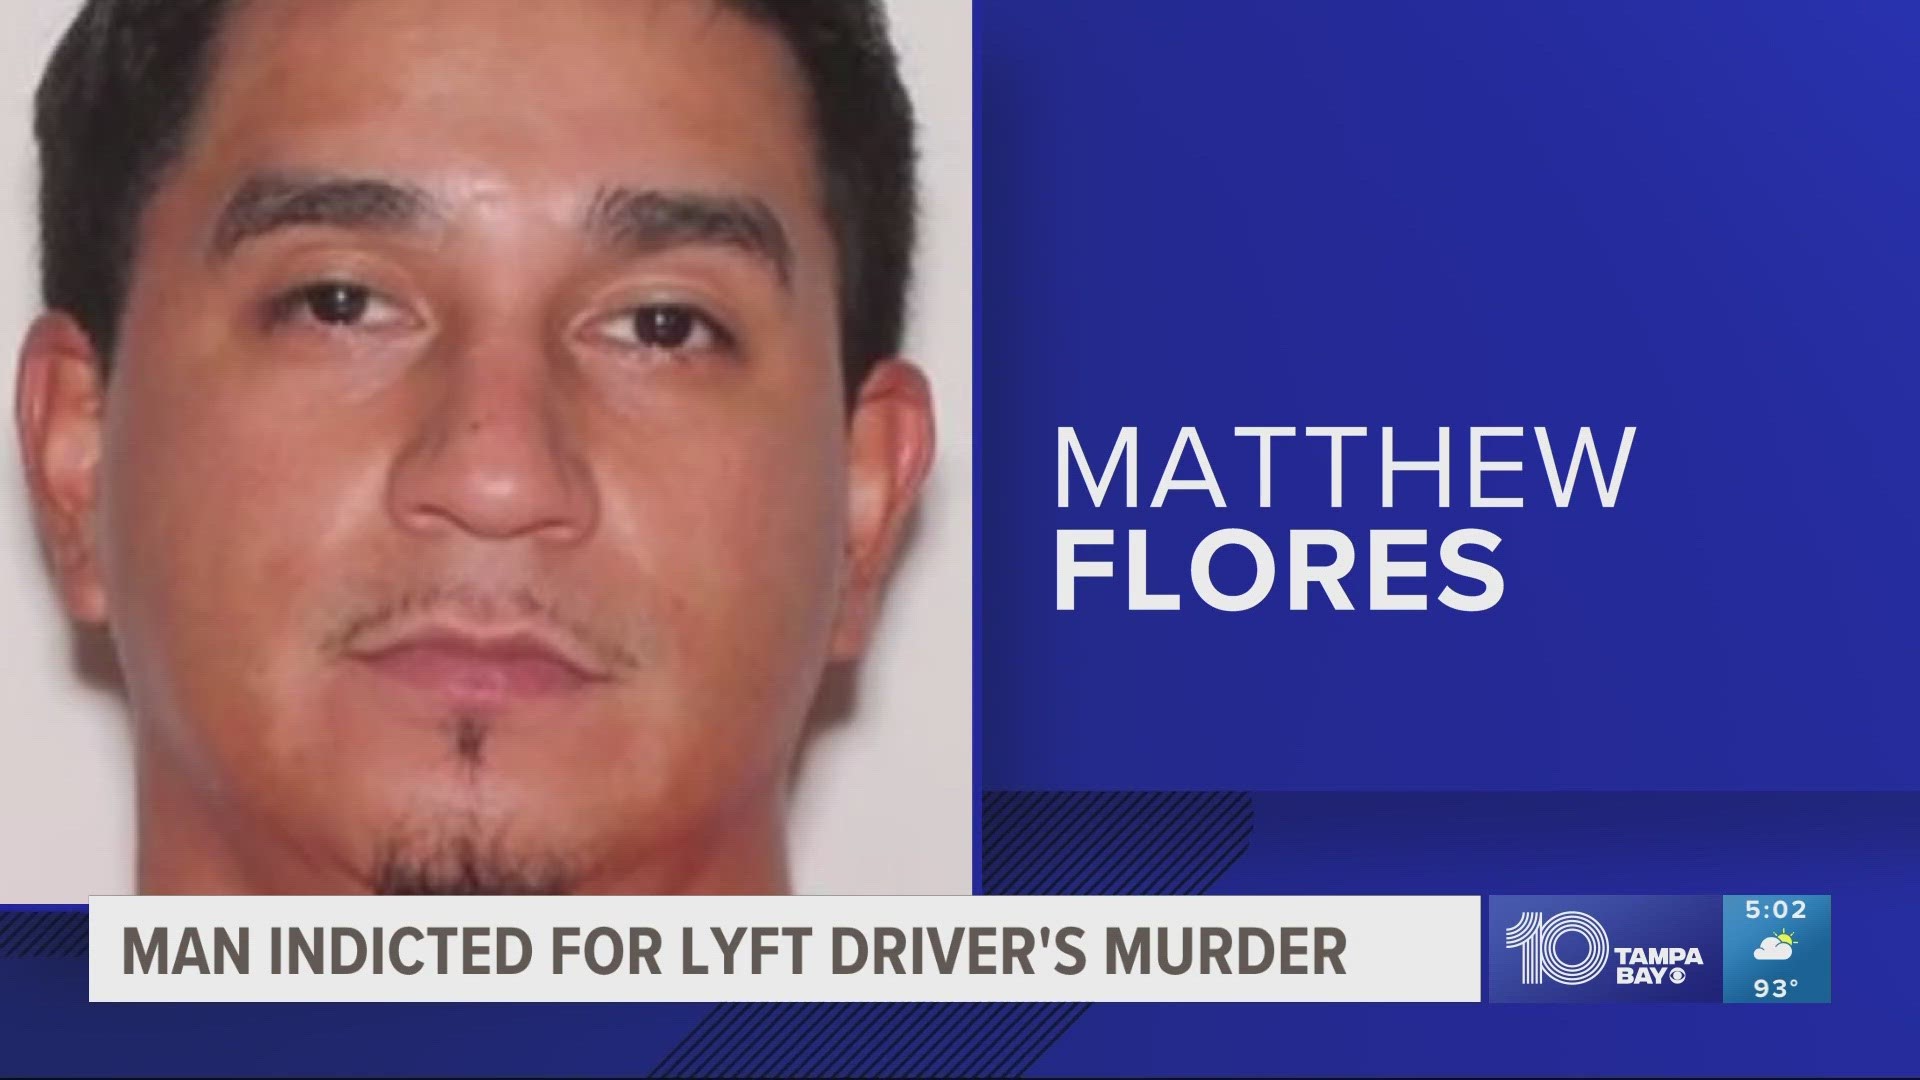 An Okeechobee County grand jury this week indicted Mathew Flores with first-degree murder and armed robbery for the Jan. 30 slaying of 74-year-old Gary Levin.